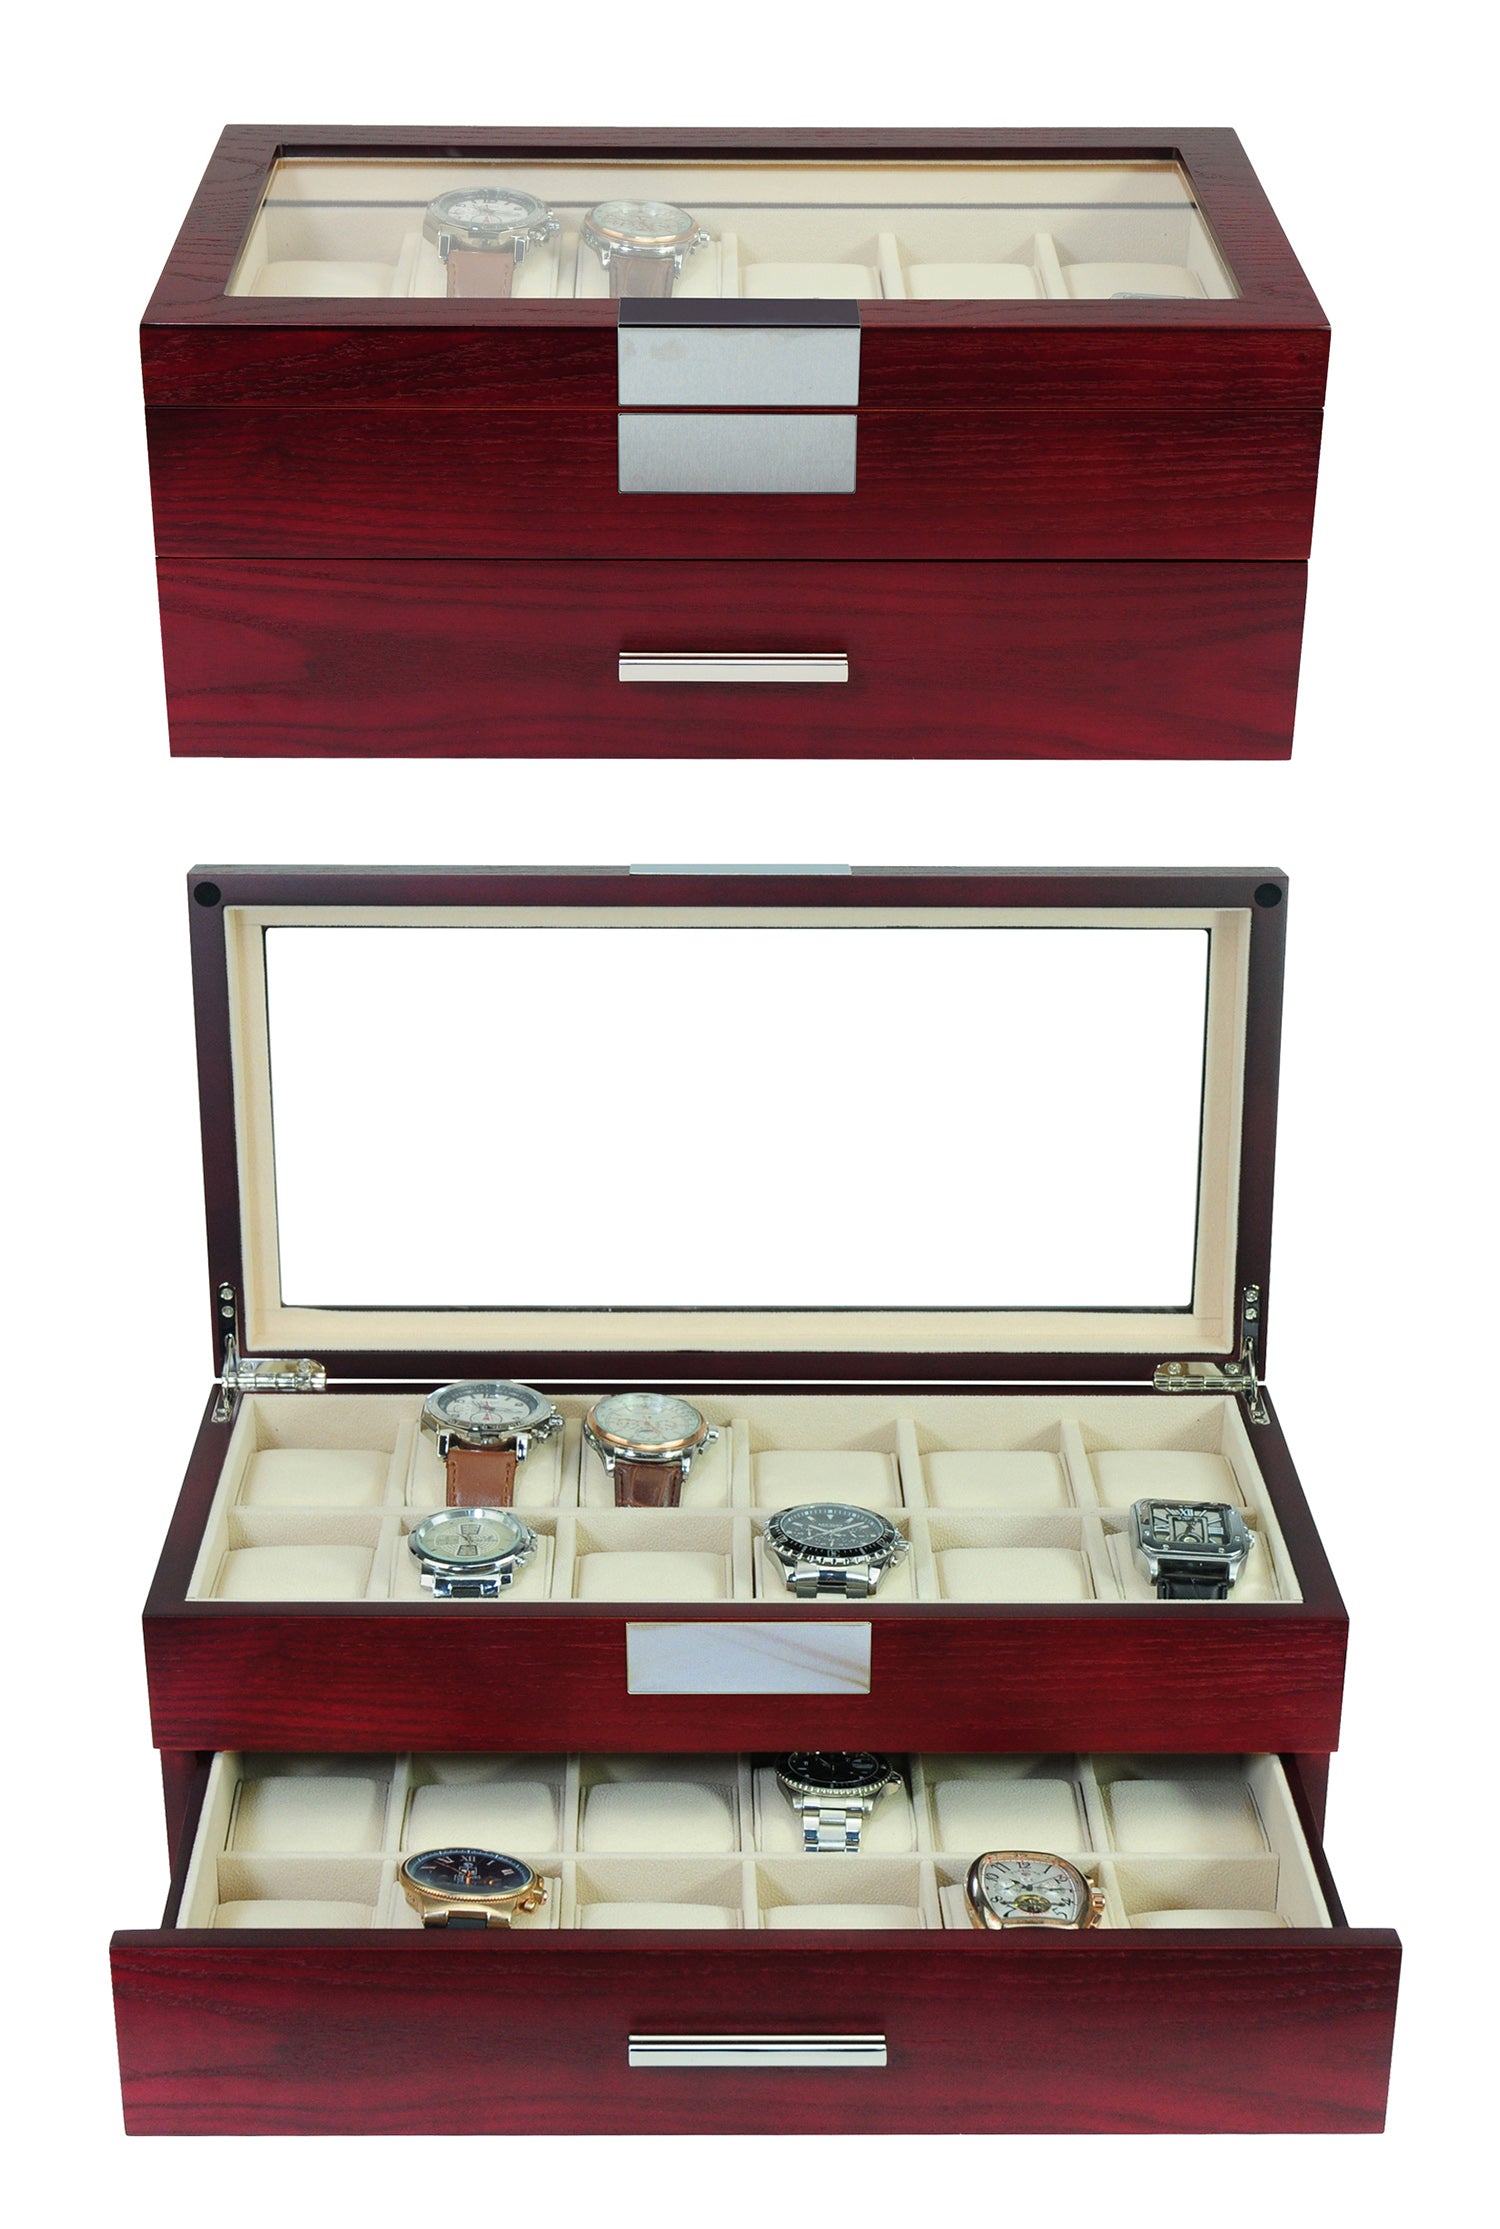 9 x 12 Cherry Wood Storage Crate / Tray - with Lid